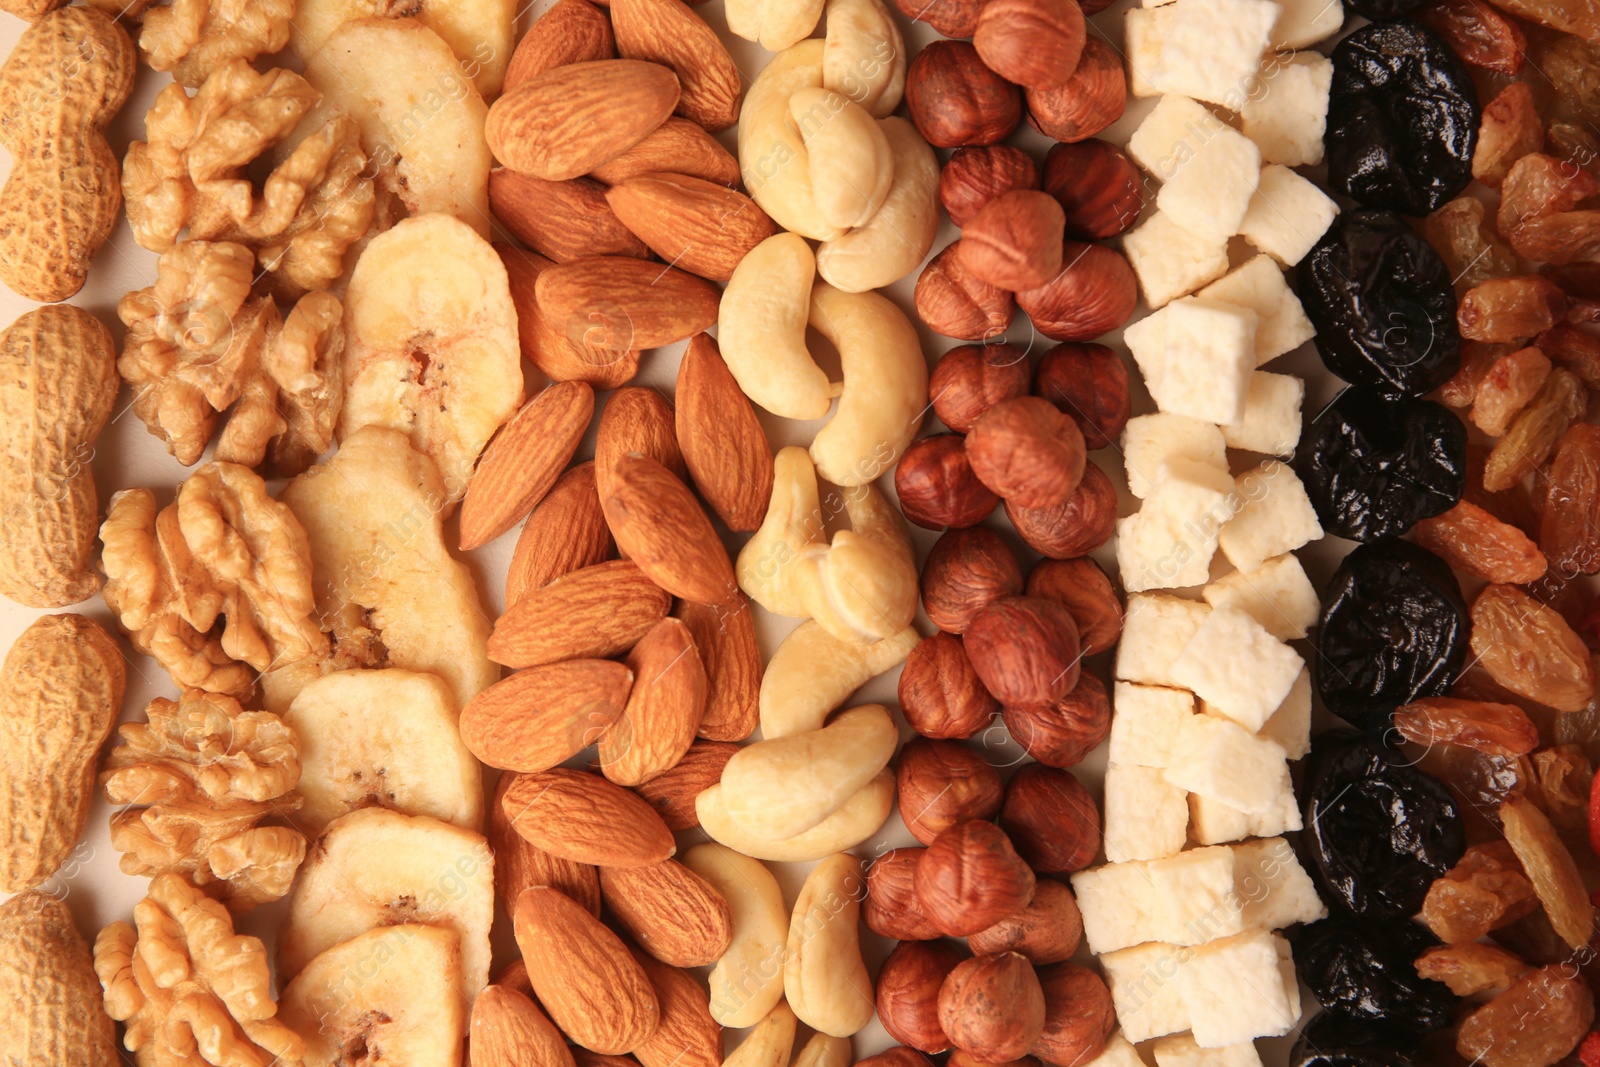 Photo of Different tasty nuts and dried fruits as background, top view